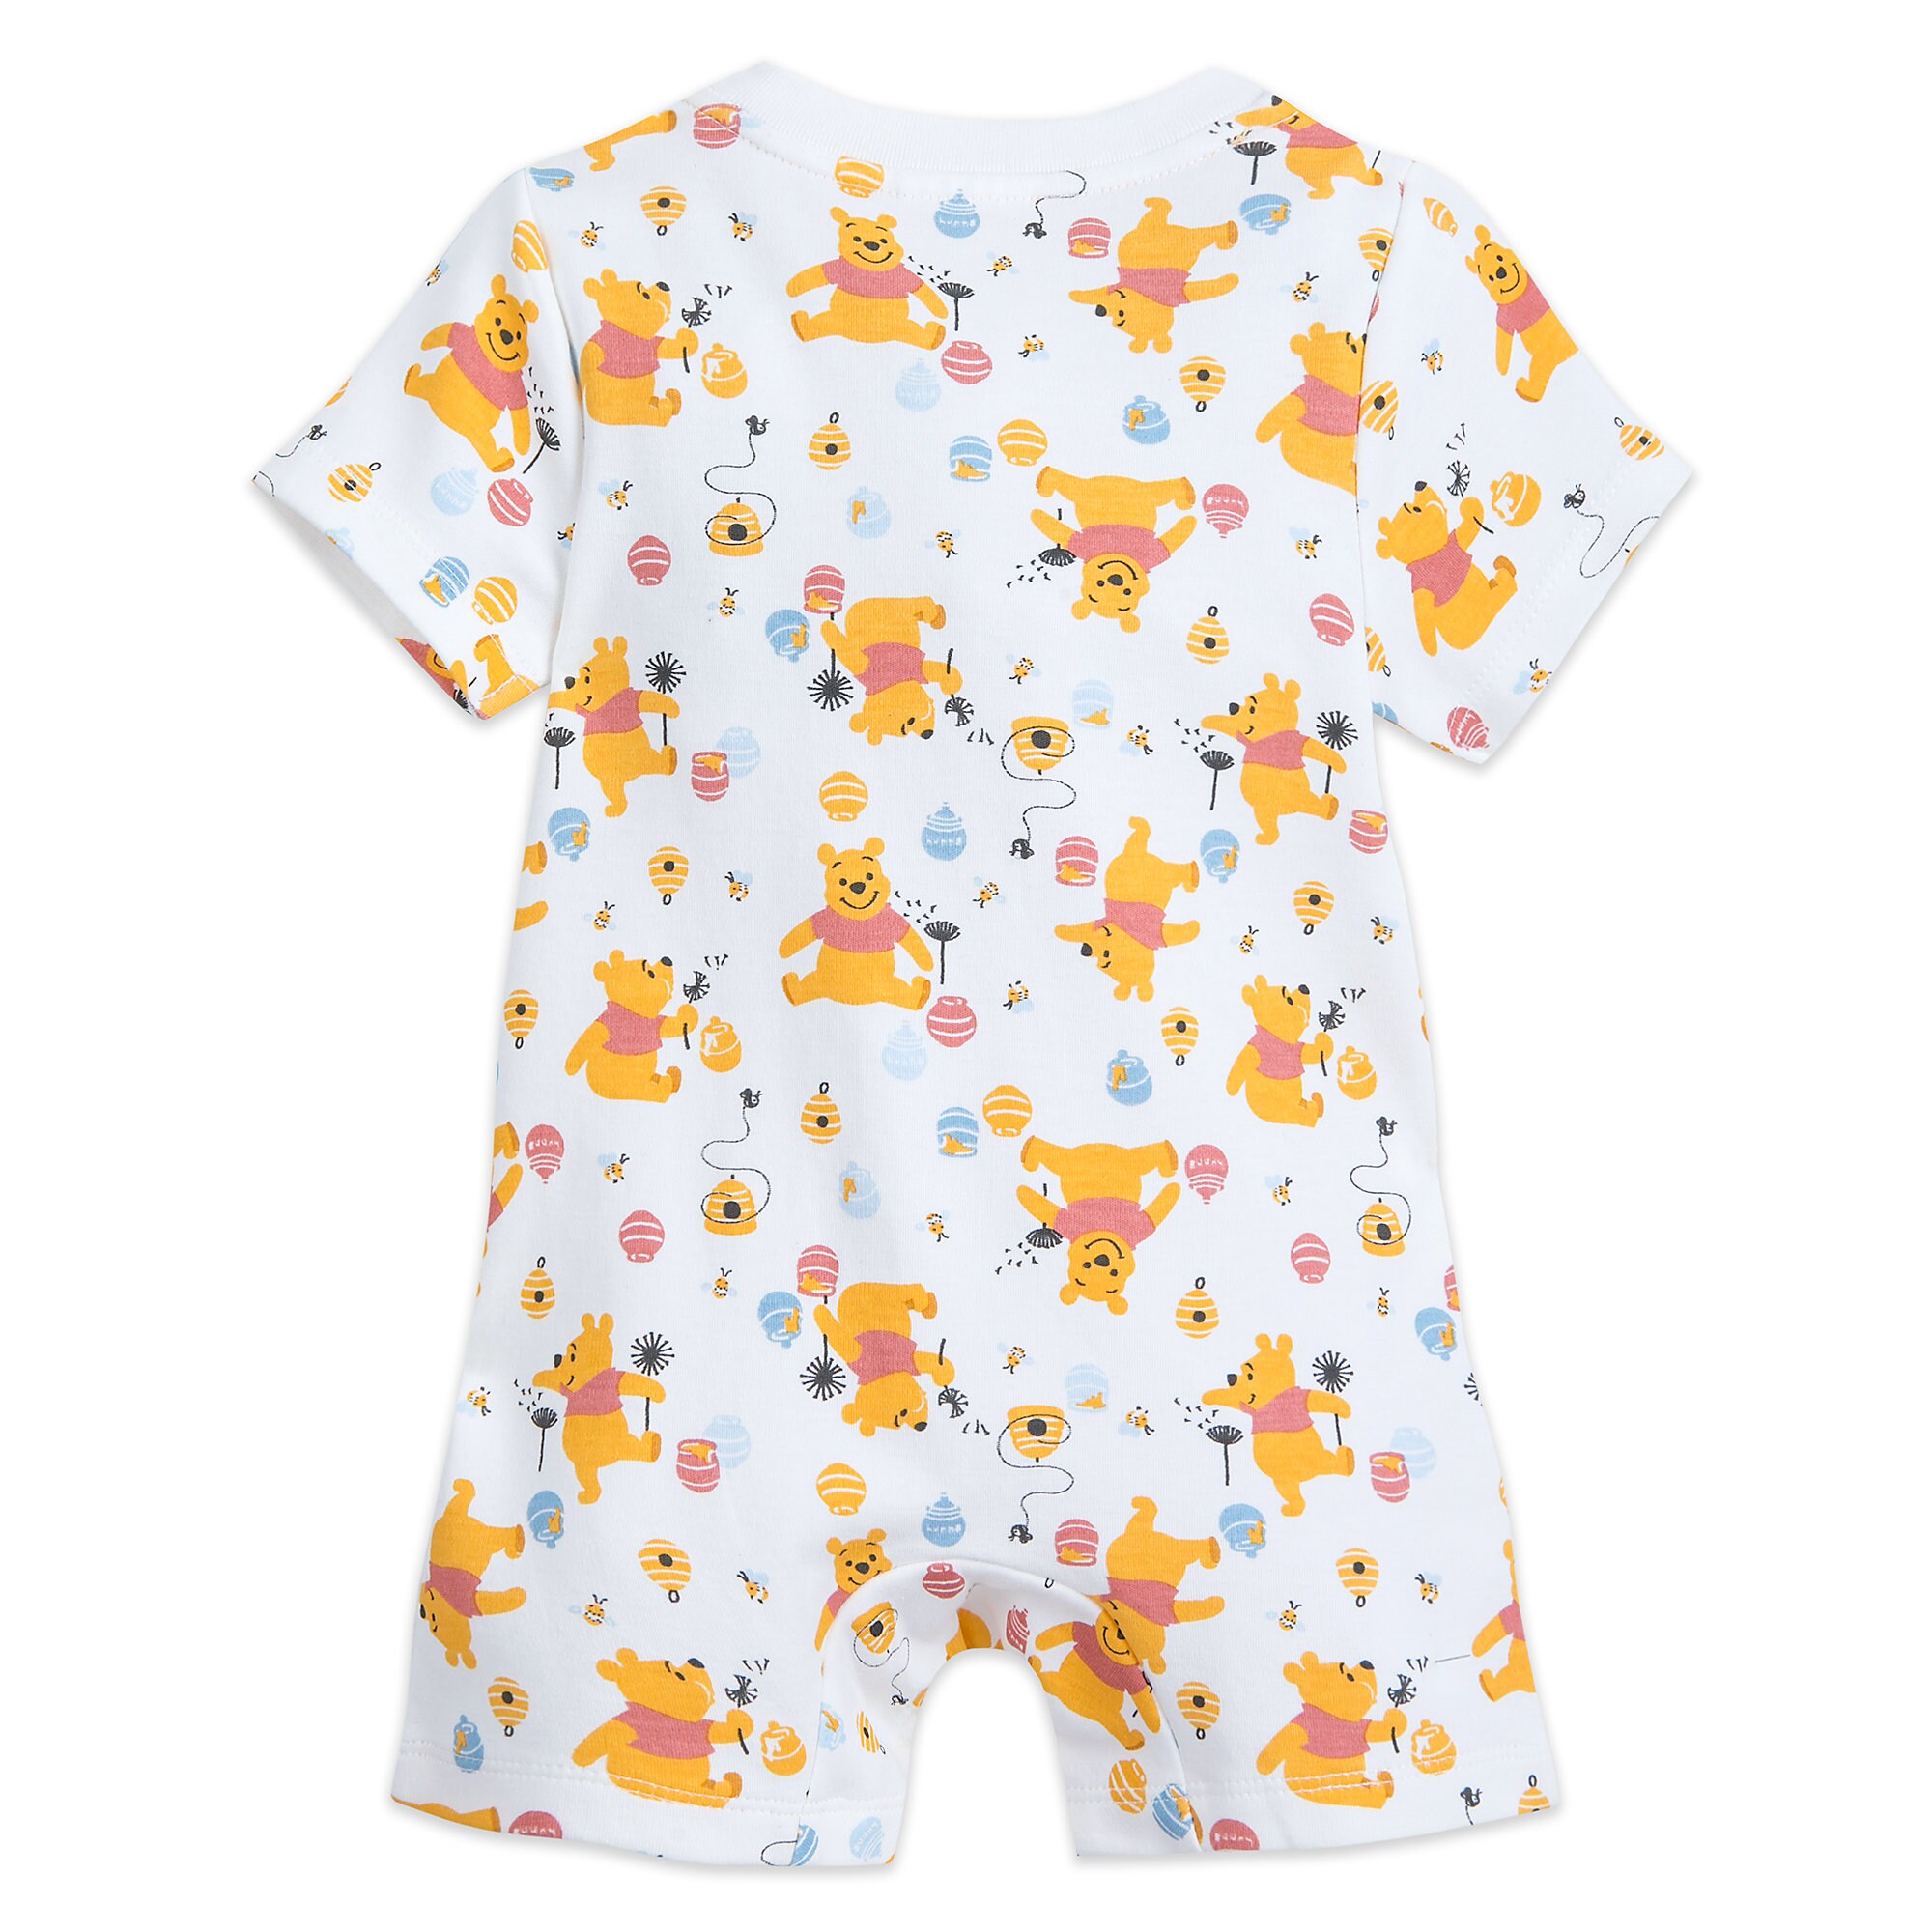 Winnie the Pooh Romper and Bib Set for Baby